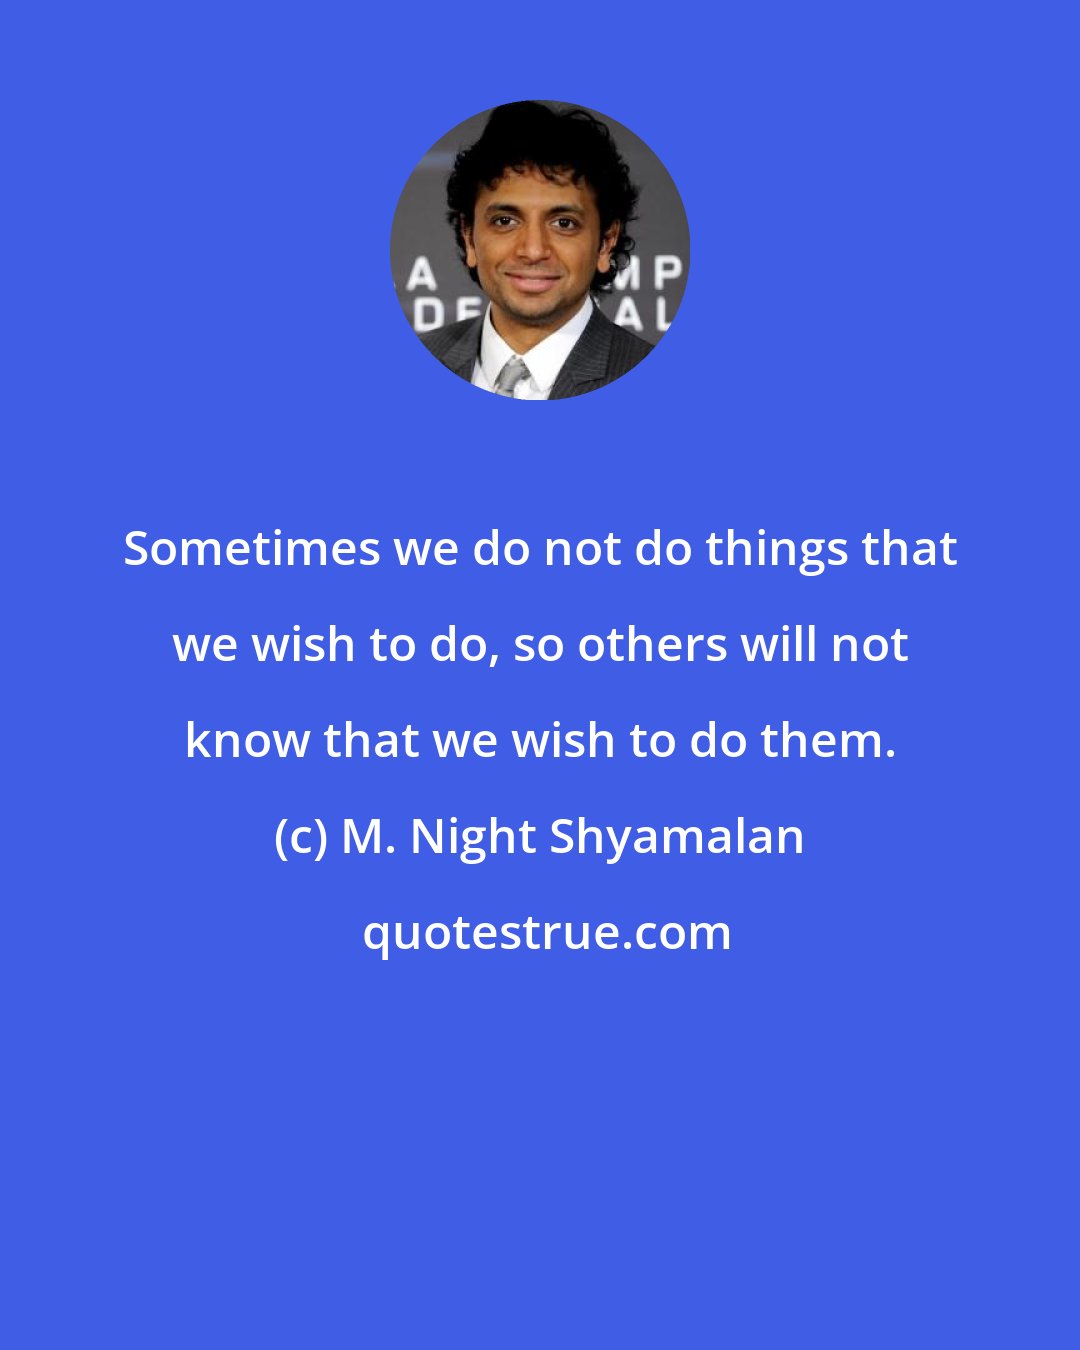 M. Night Shyamalan: Sometimes we do not do things that we wish to do, so others will not know that we wish to do them.